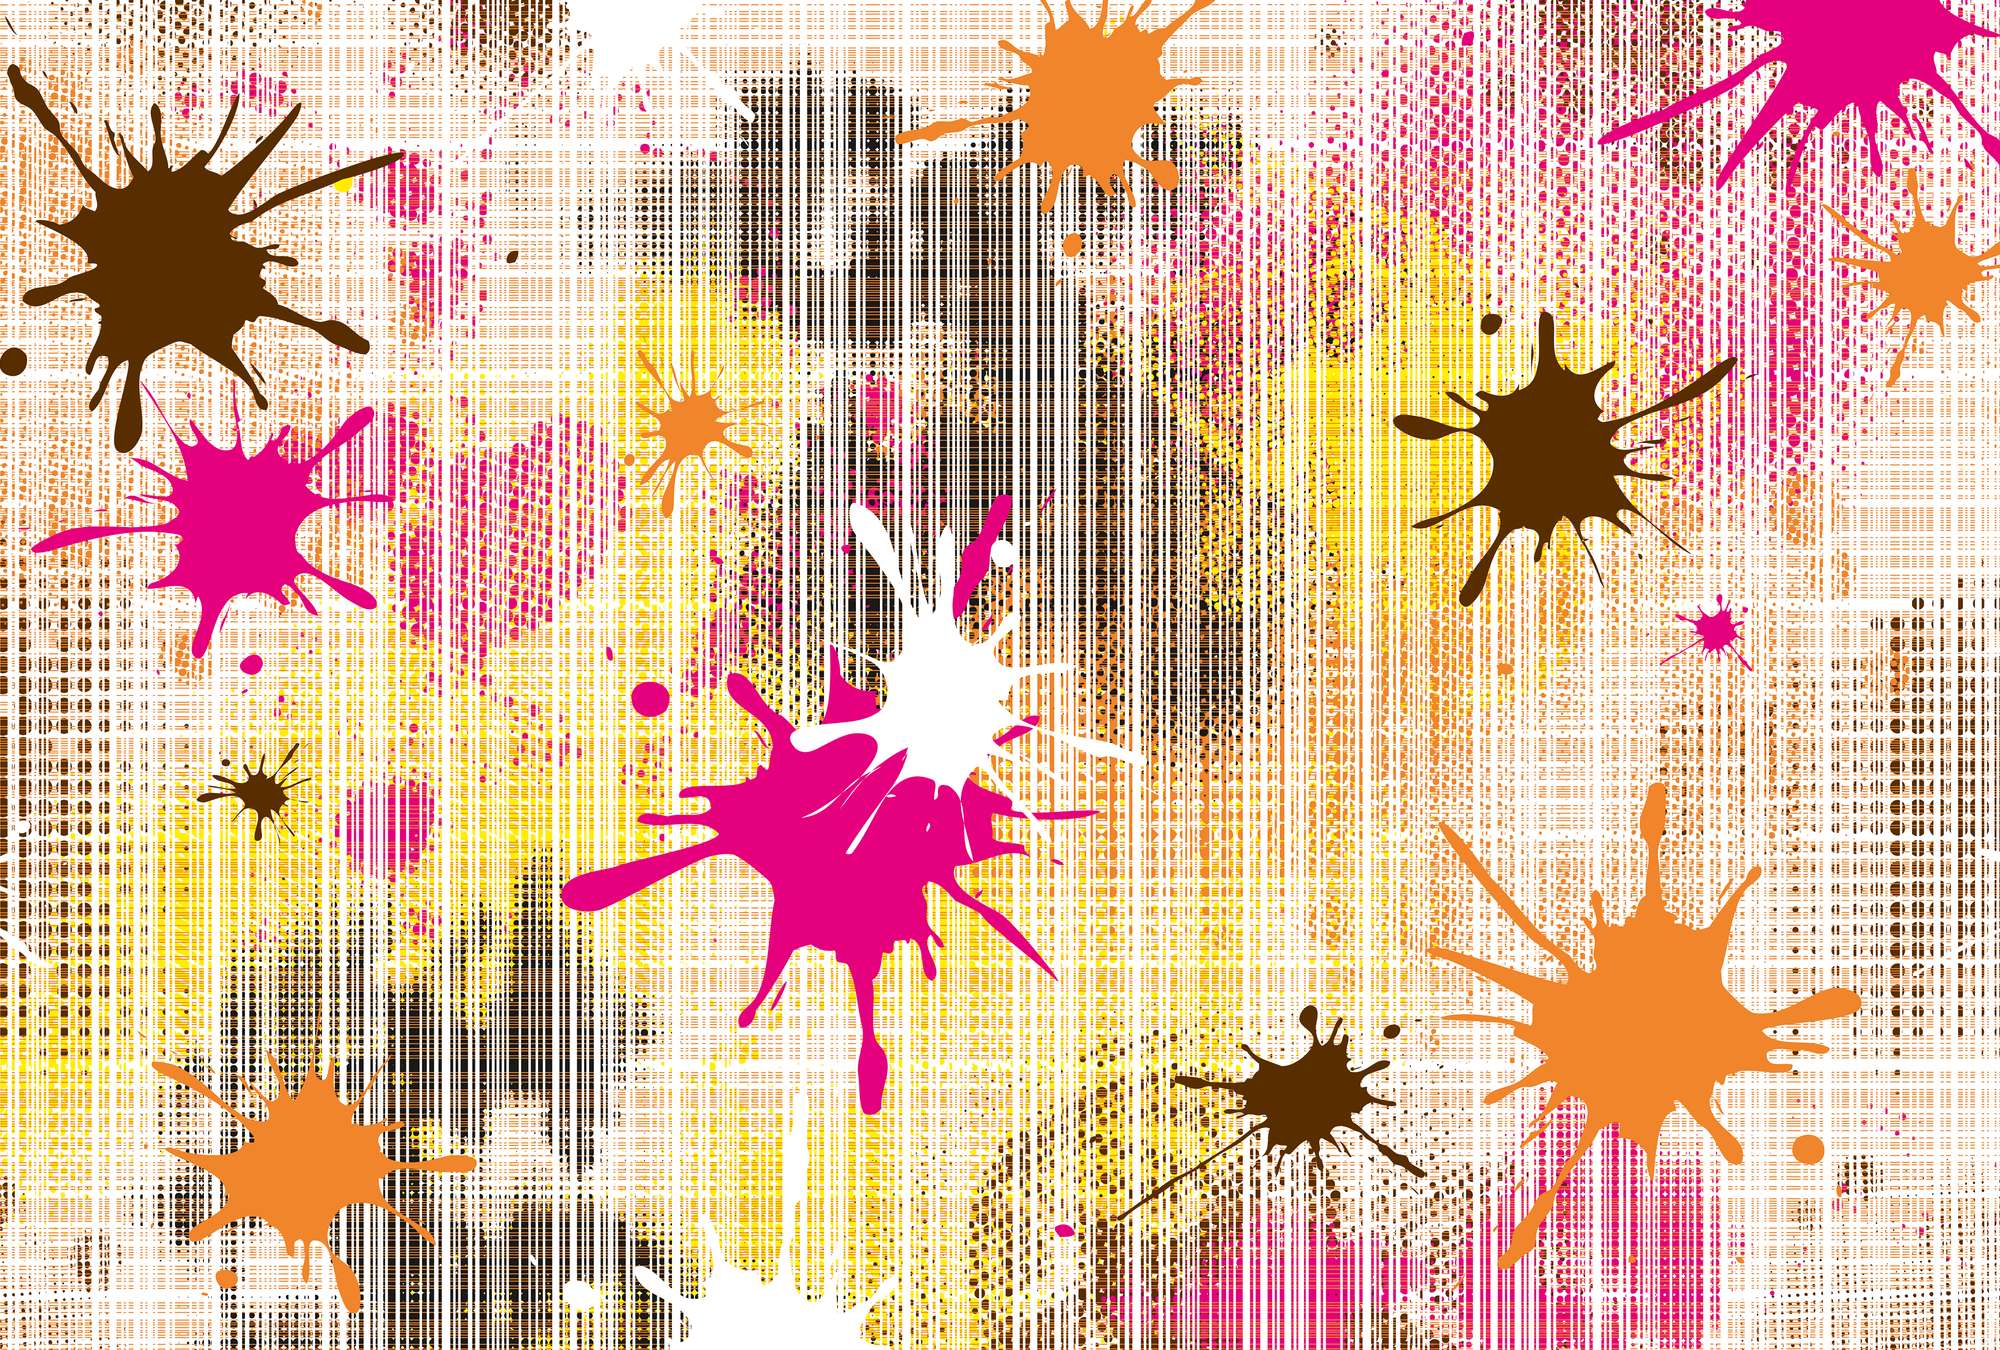             Photo wallpaper graphic design with colourful splashes of colour
        